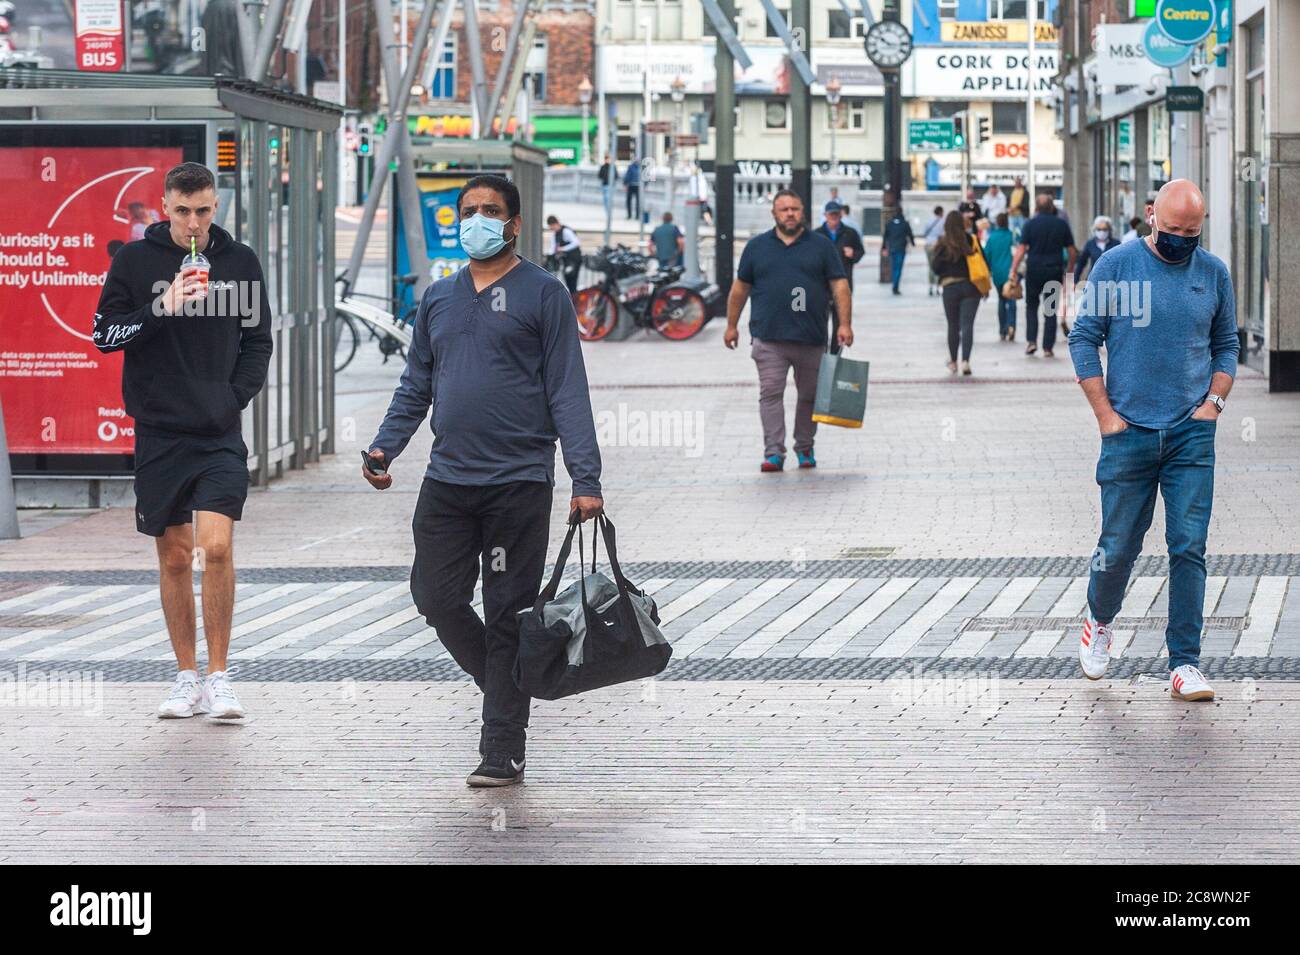 Cork, Ireland. 27th July, 2020. Many people were wearing face masks in Cork City today to protect themselves against Covid-19. Credit: AG News/Alamy Live News Stock Photo